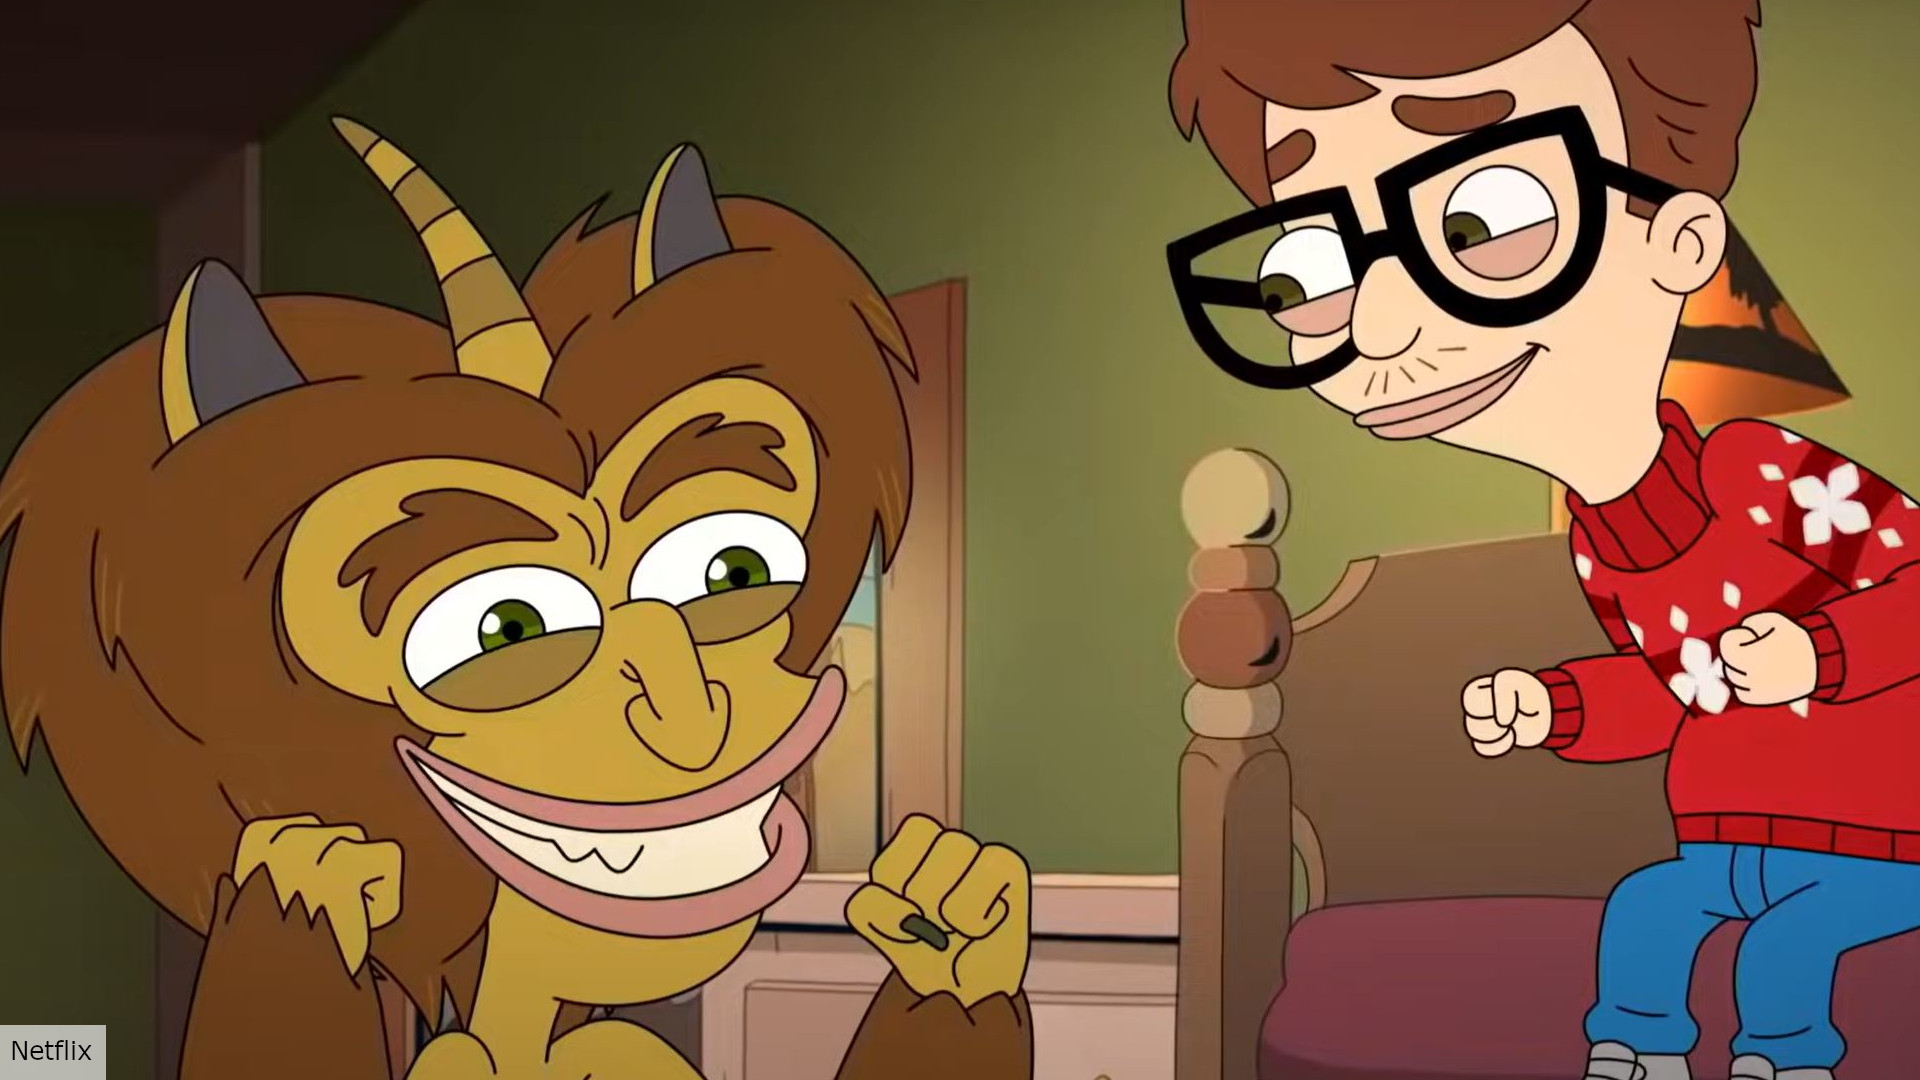 Big Mouth Season 7 Release Date Revealed! Get Ready for More Awkward Puberty Moments 14